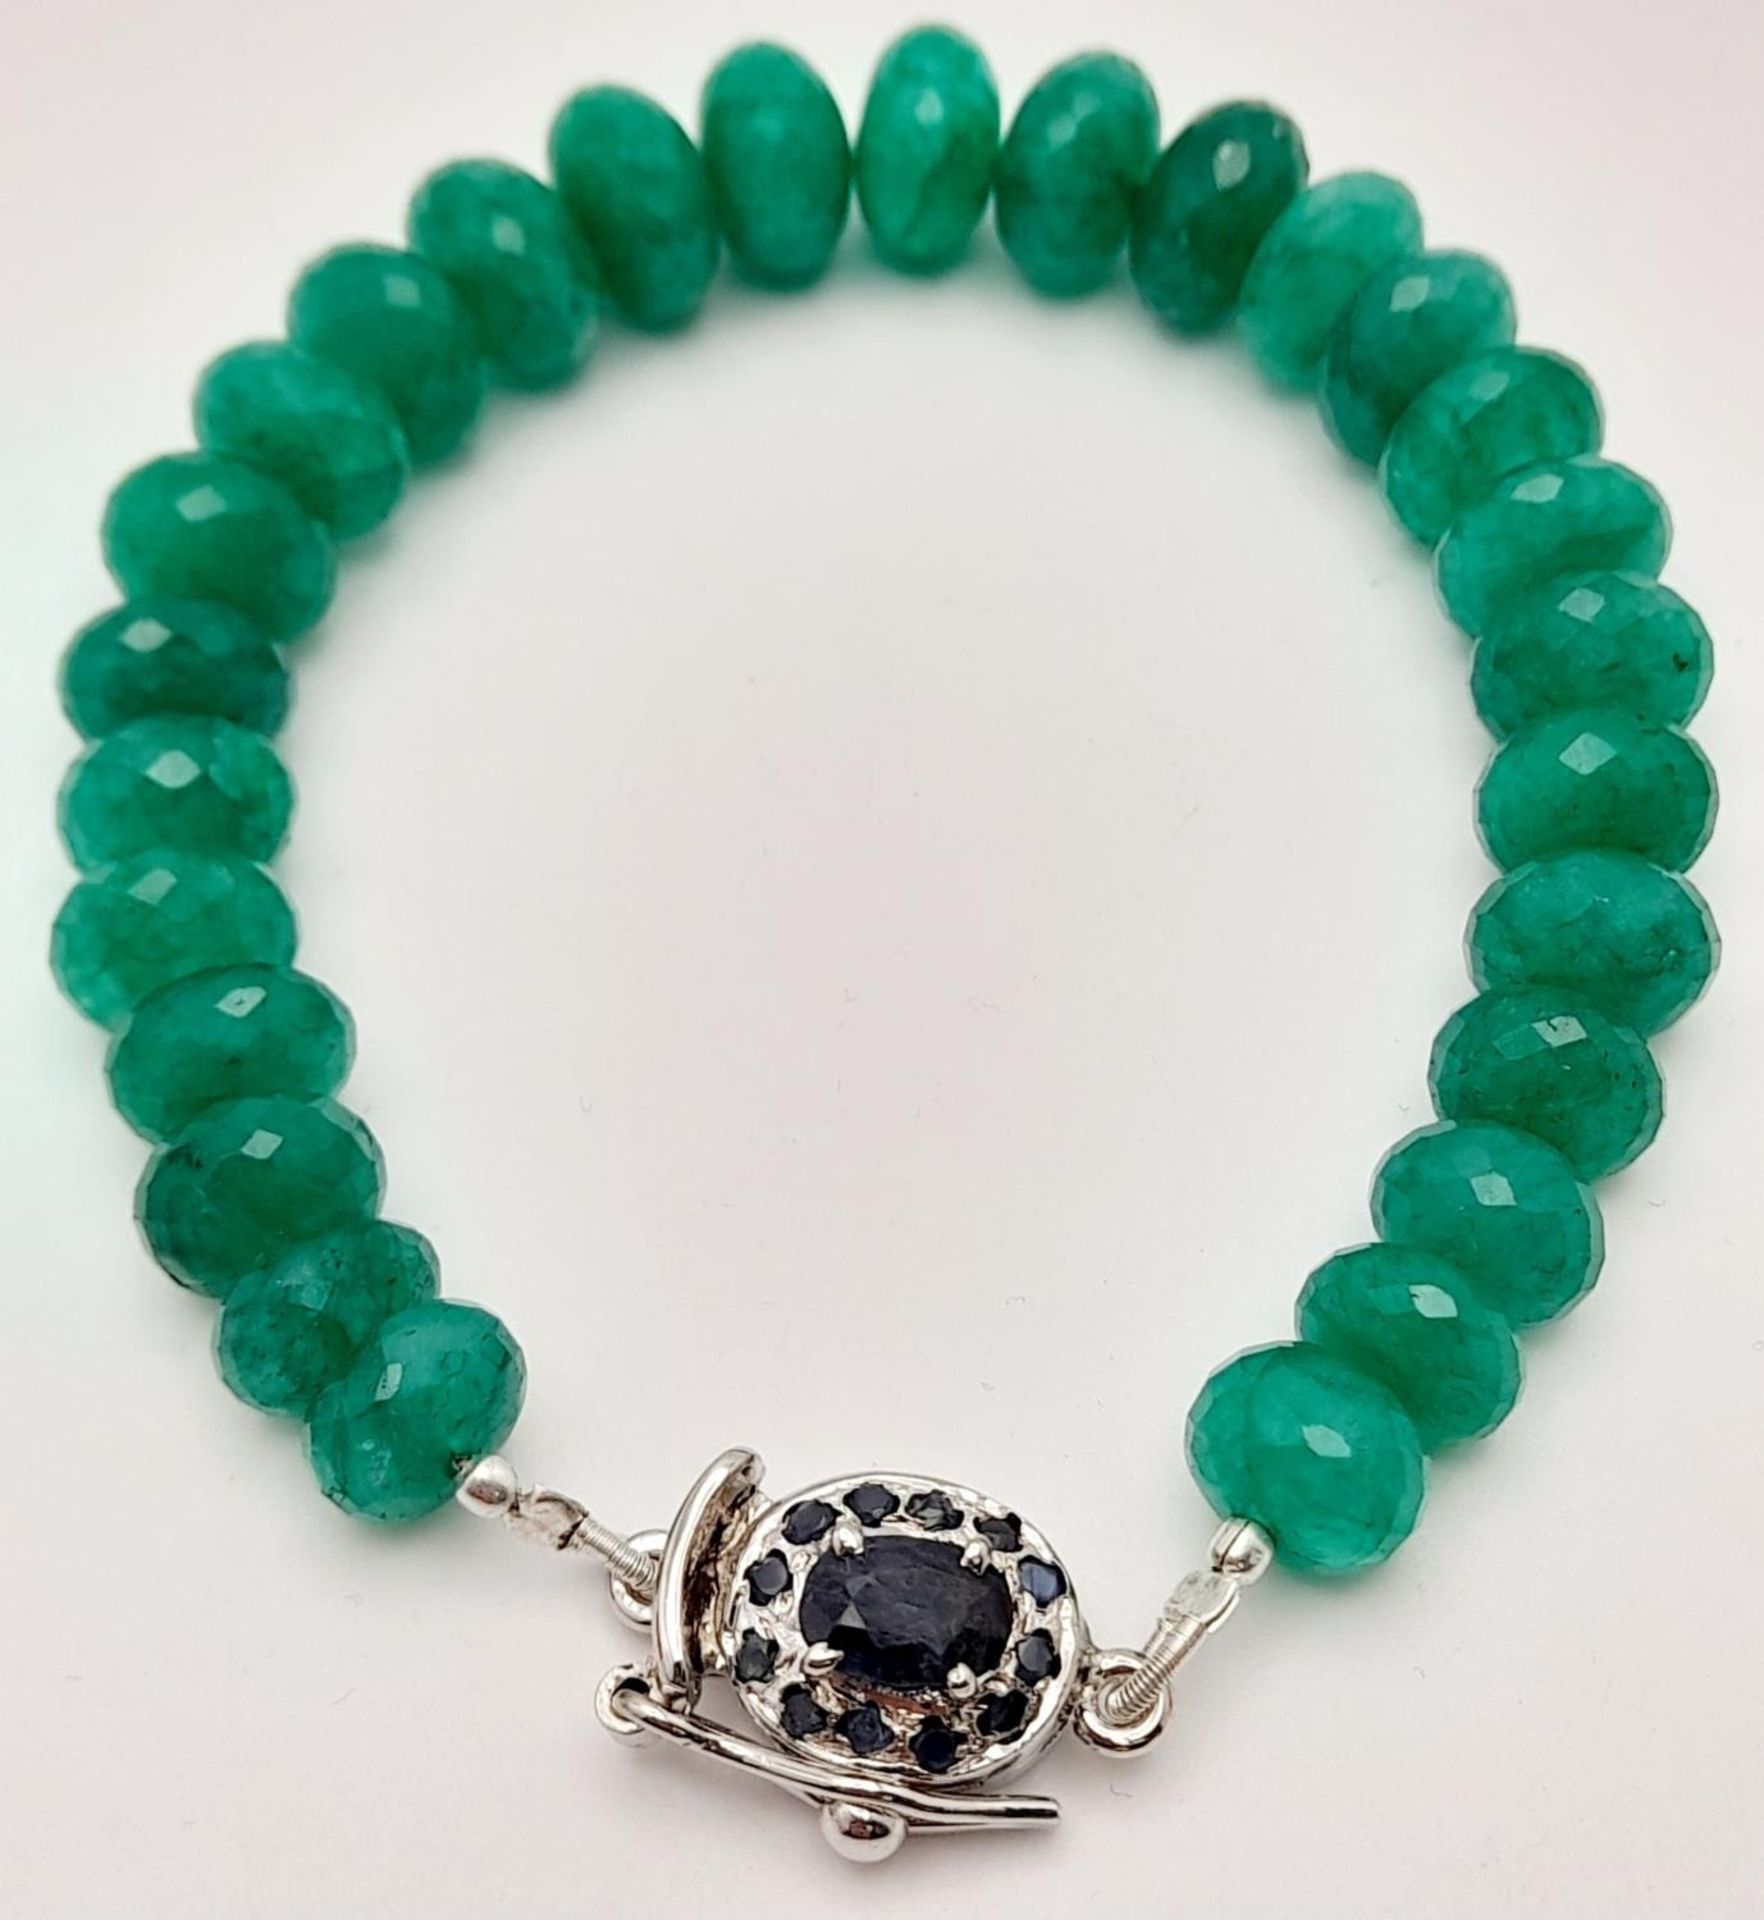 A 130ctw Faceted Rondelle Emerald Bracelet with a sapphire and 925 Silver clasp. 16cm. Ref: CD-1298